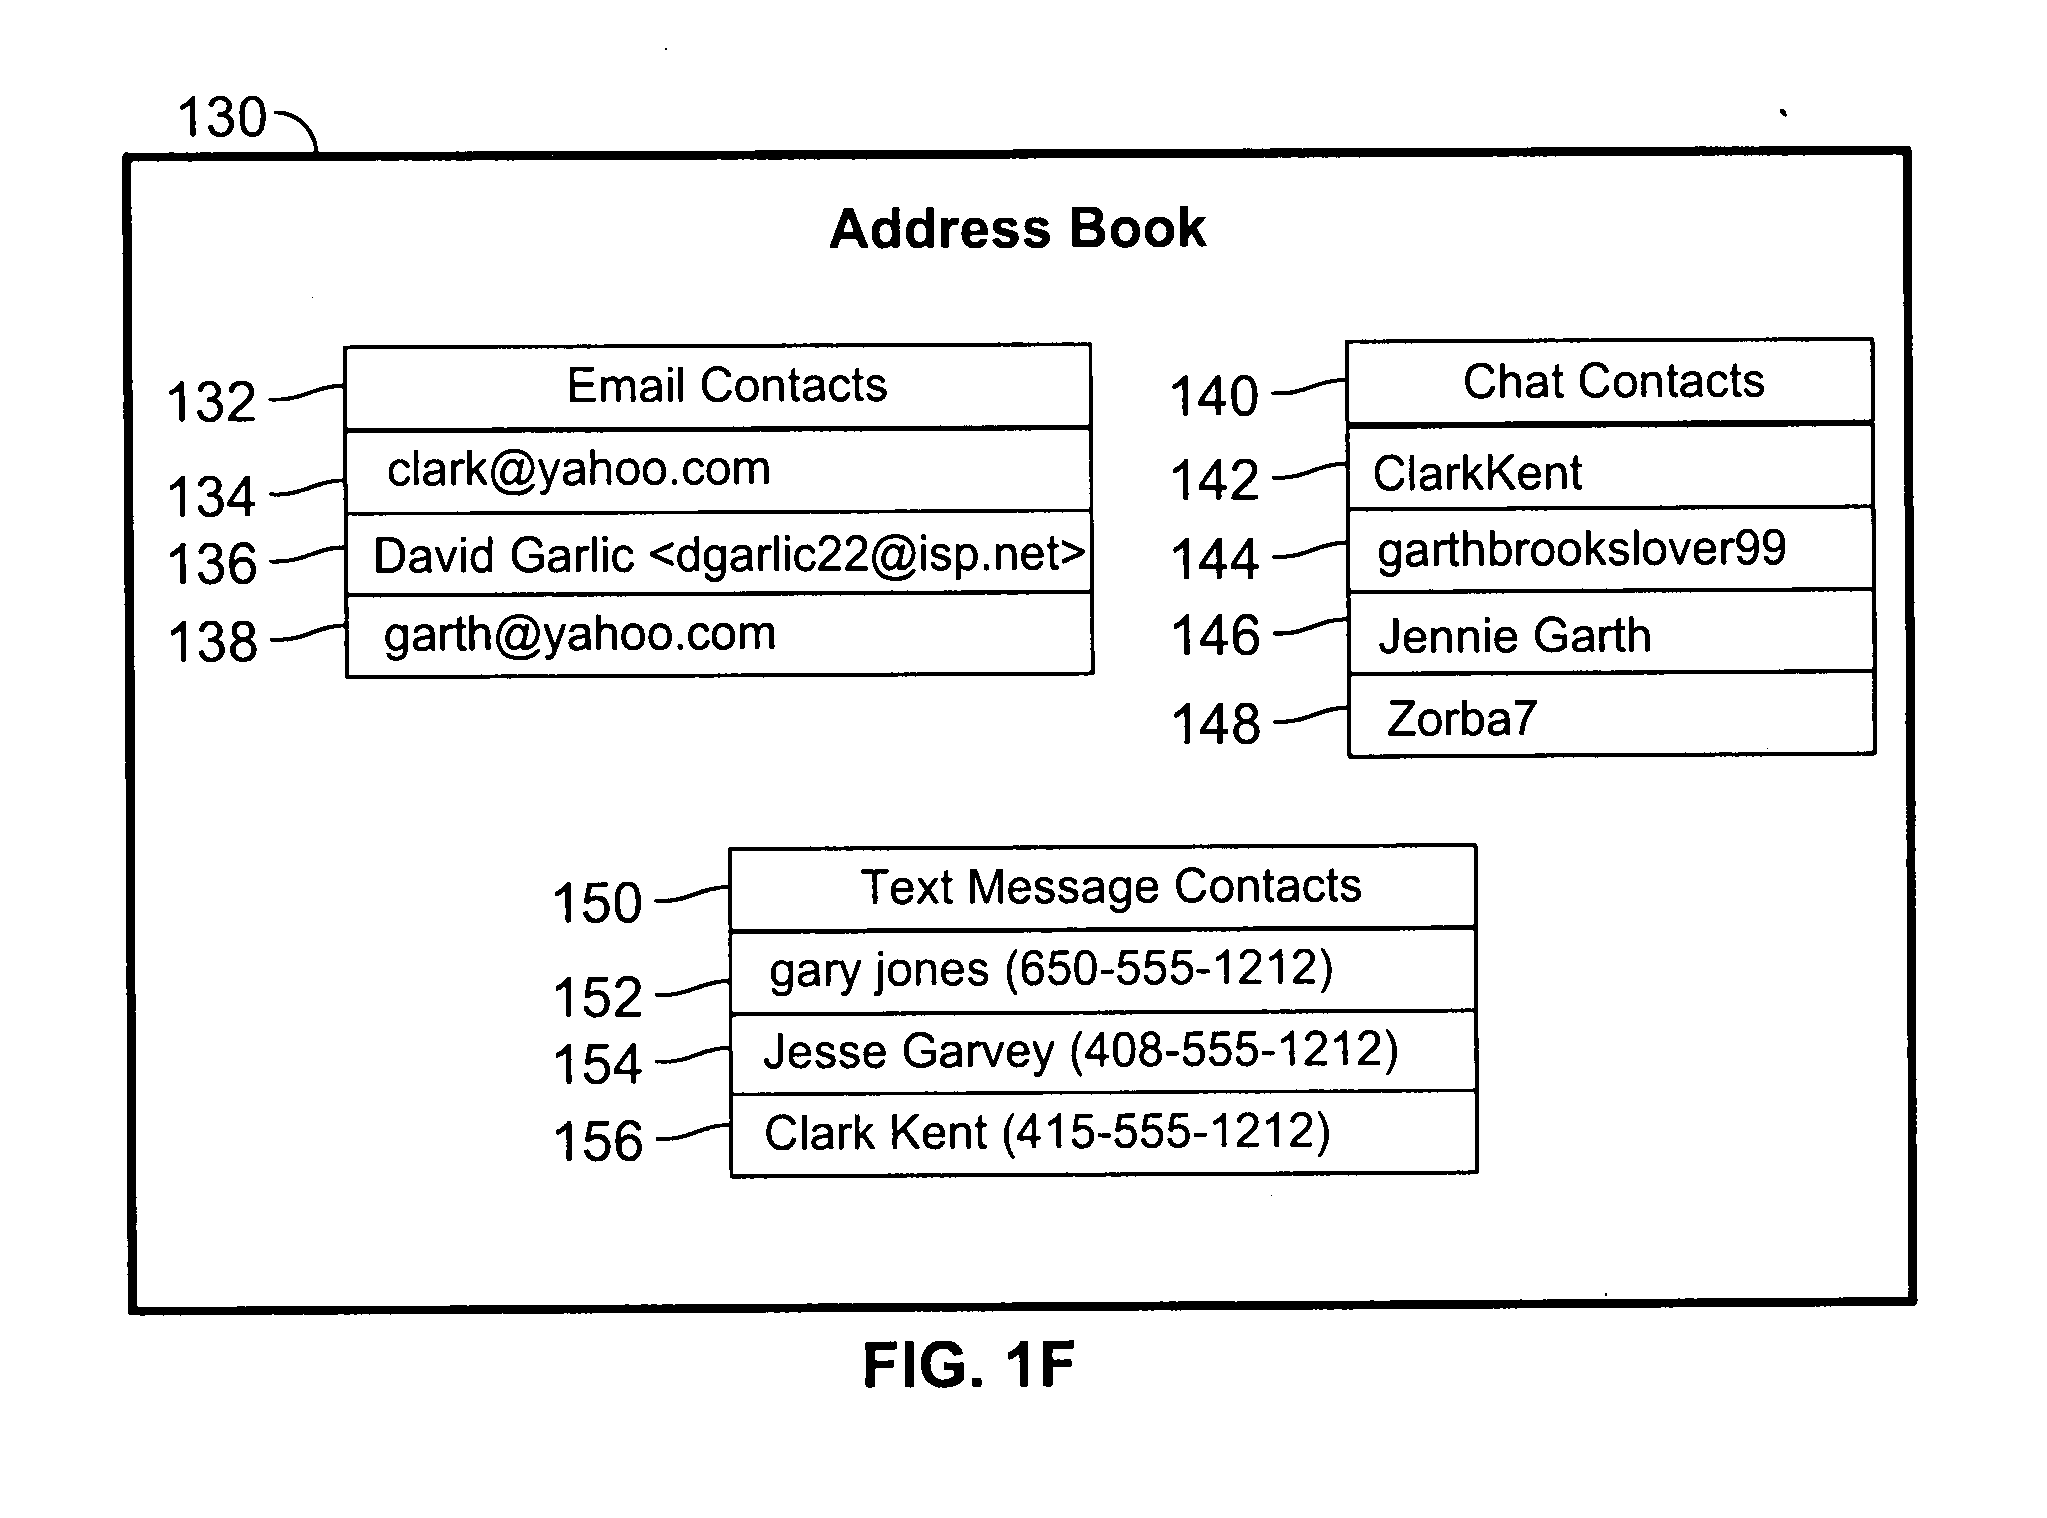 Autocomplete for intergrating diverse methods of electronic communication